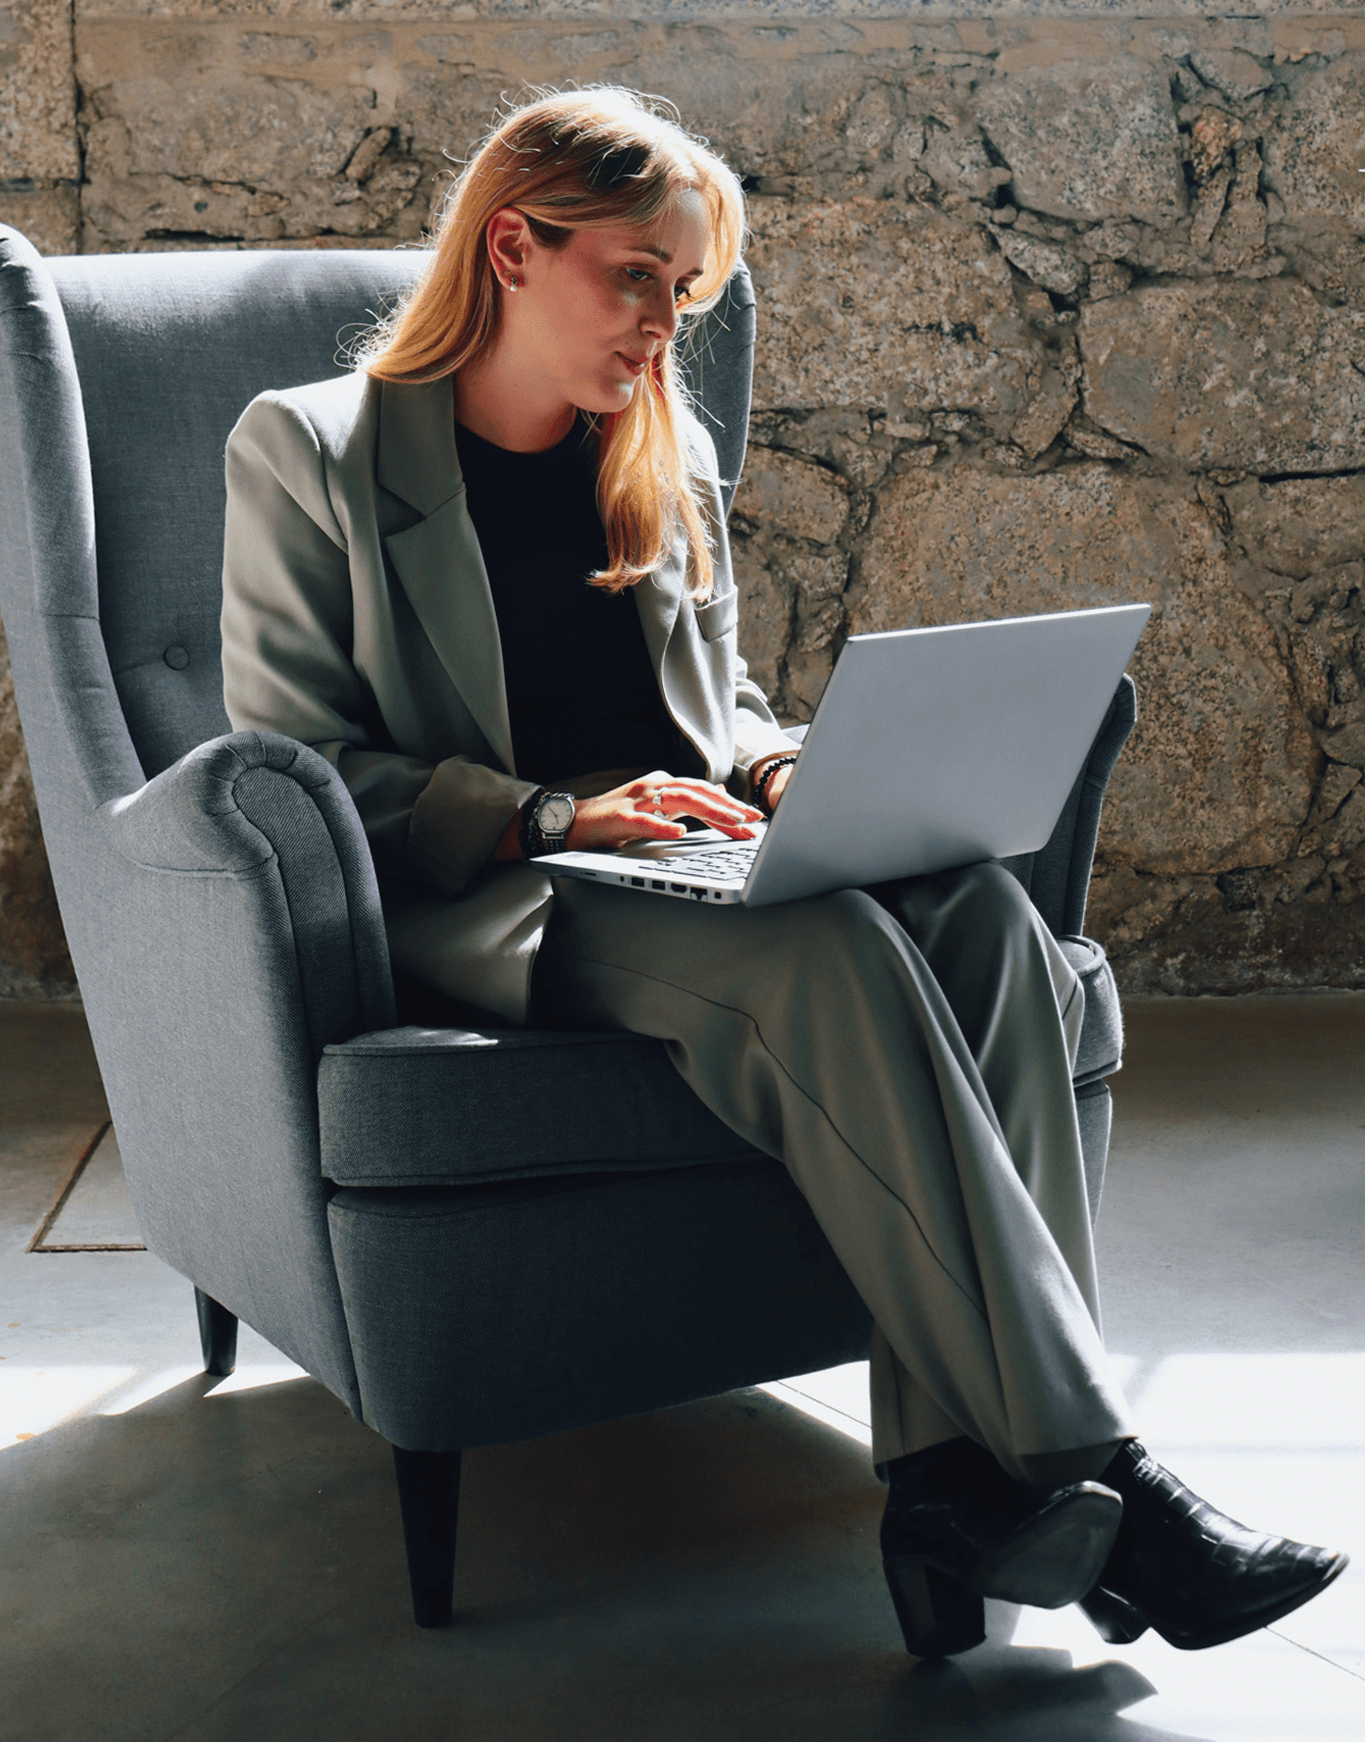 young woman working at her laptop sitting on a comfy chair. The backgound is a wall of stone.